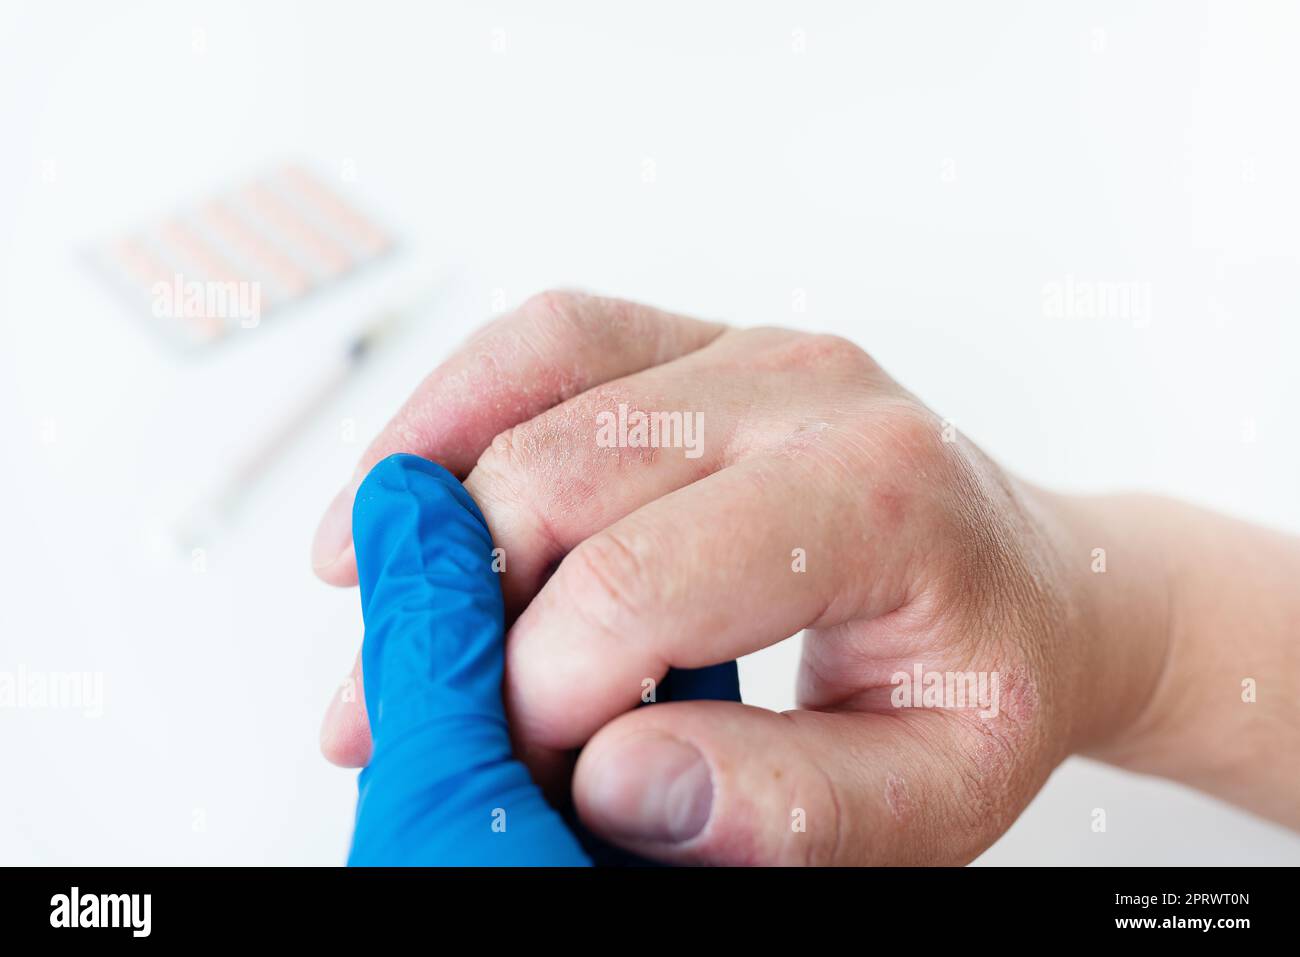 A man shows a reddened rash on his hands to the doctor. Causes of itchy skin can be dermatitis (eczema), dry skin, burns, food allergies. healthcare concept. Stock Photo